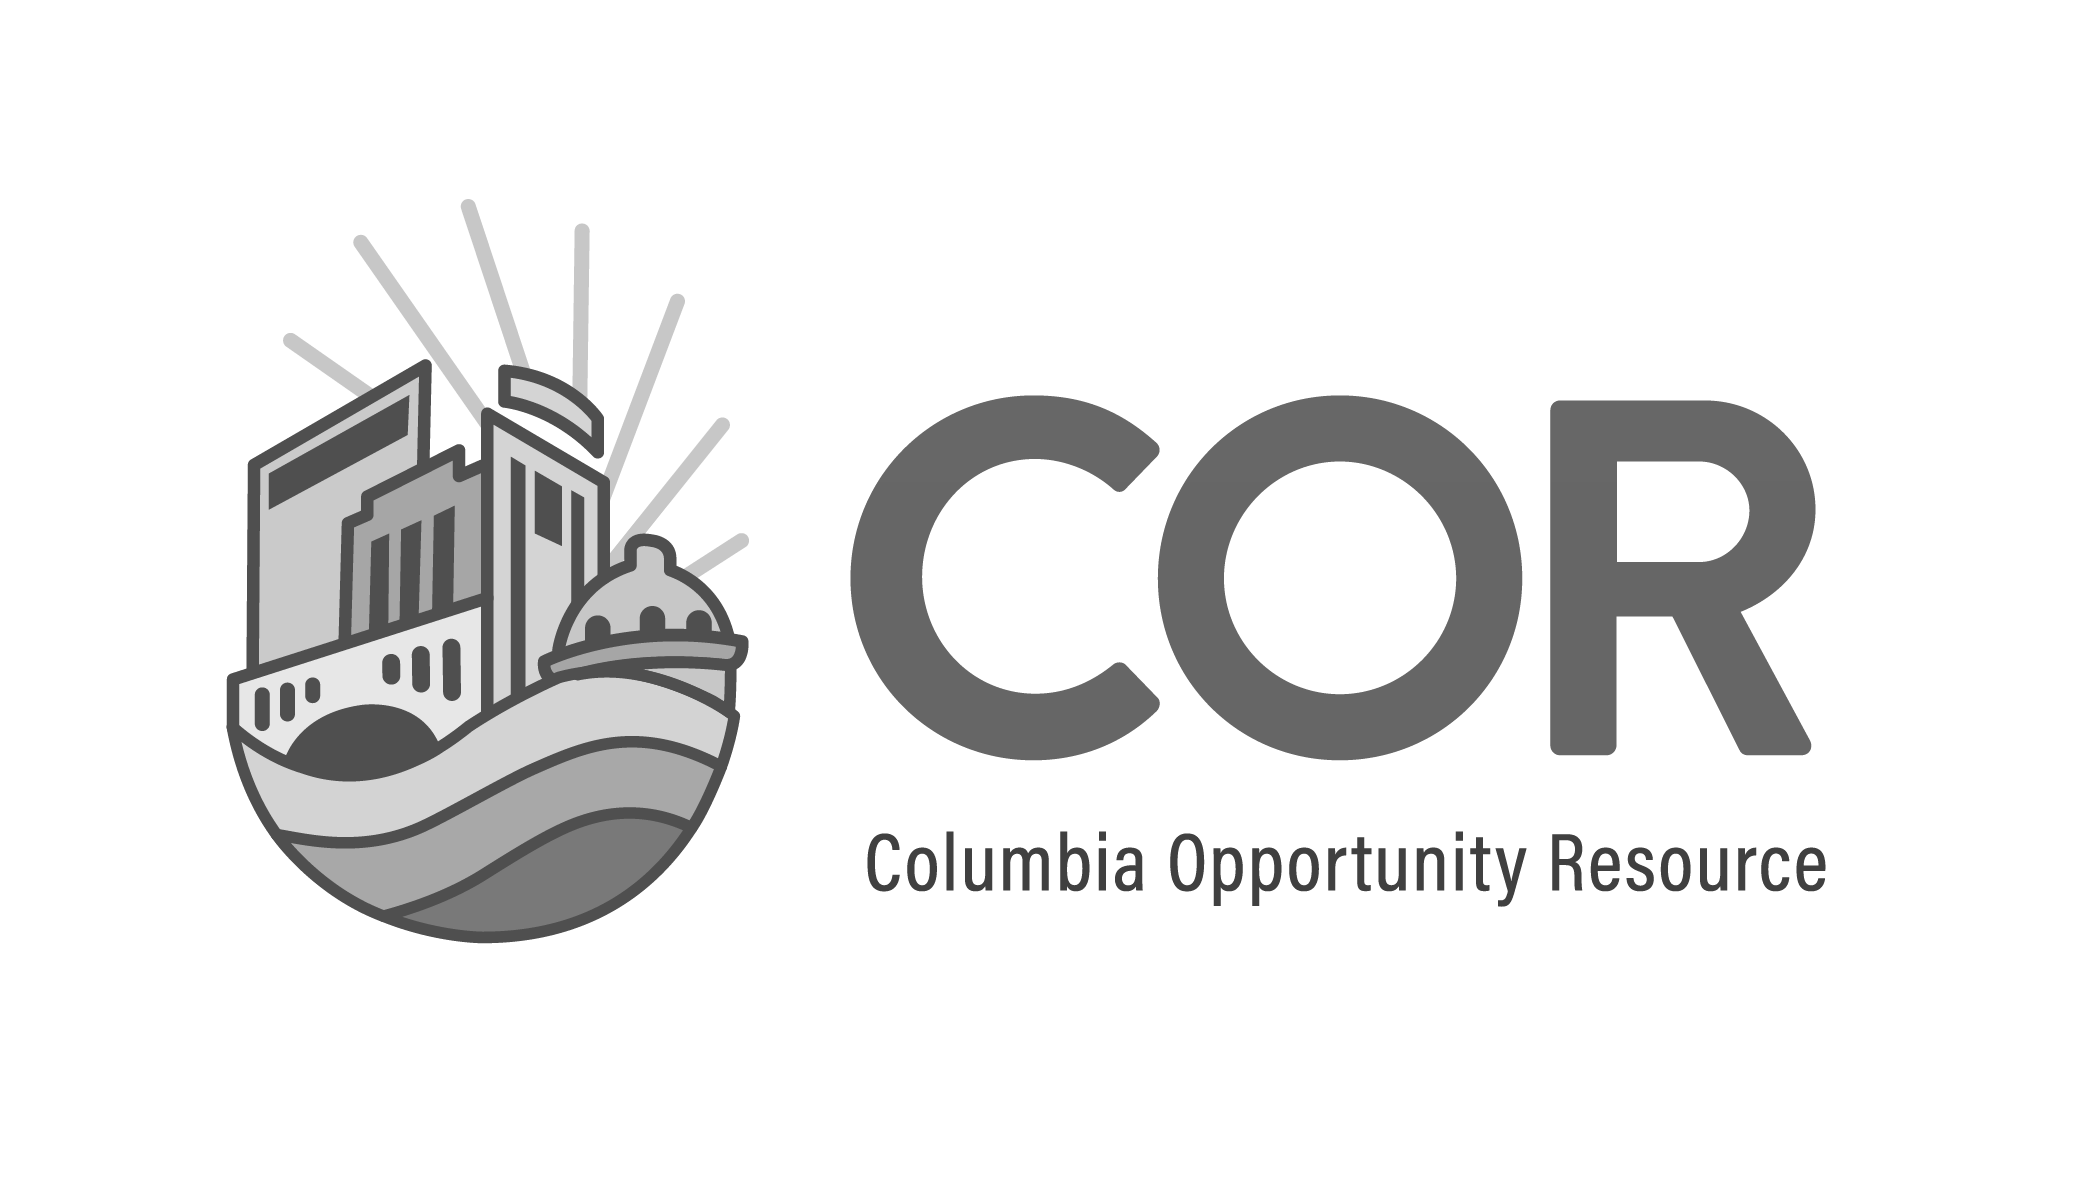 Columbia opportunity resource